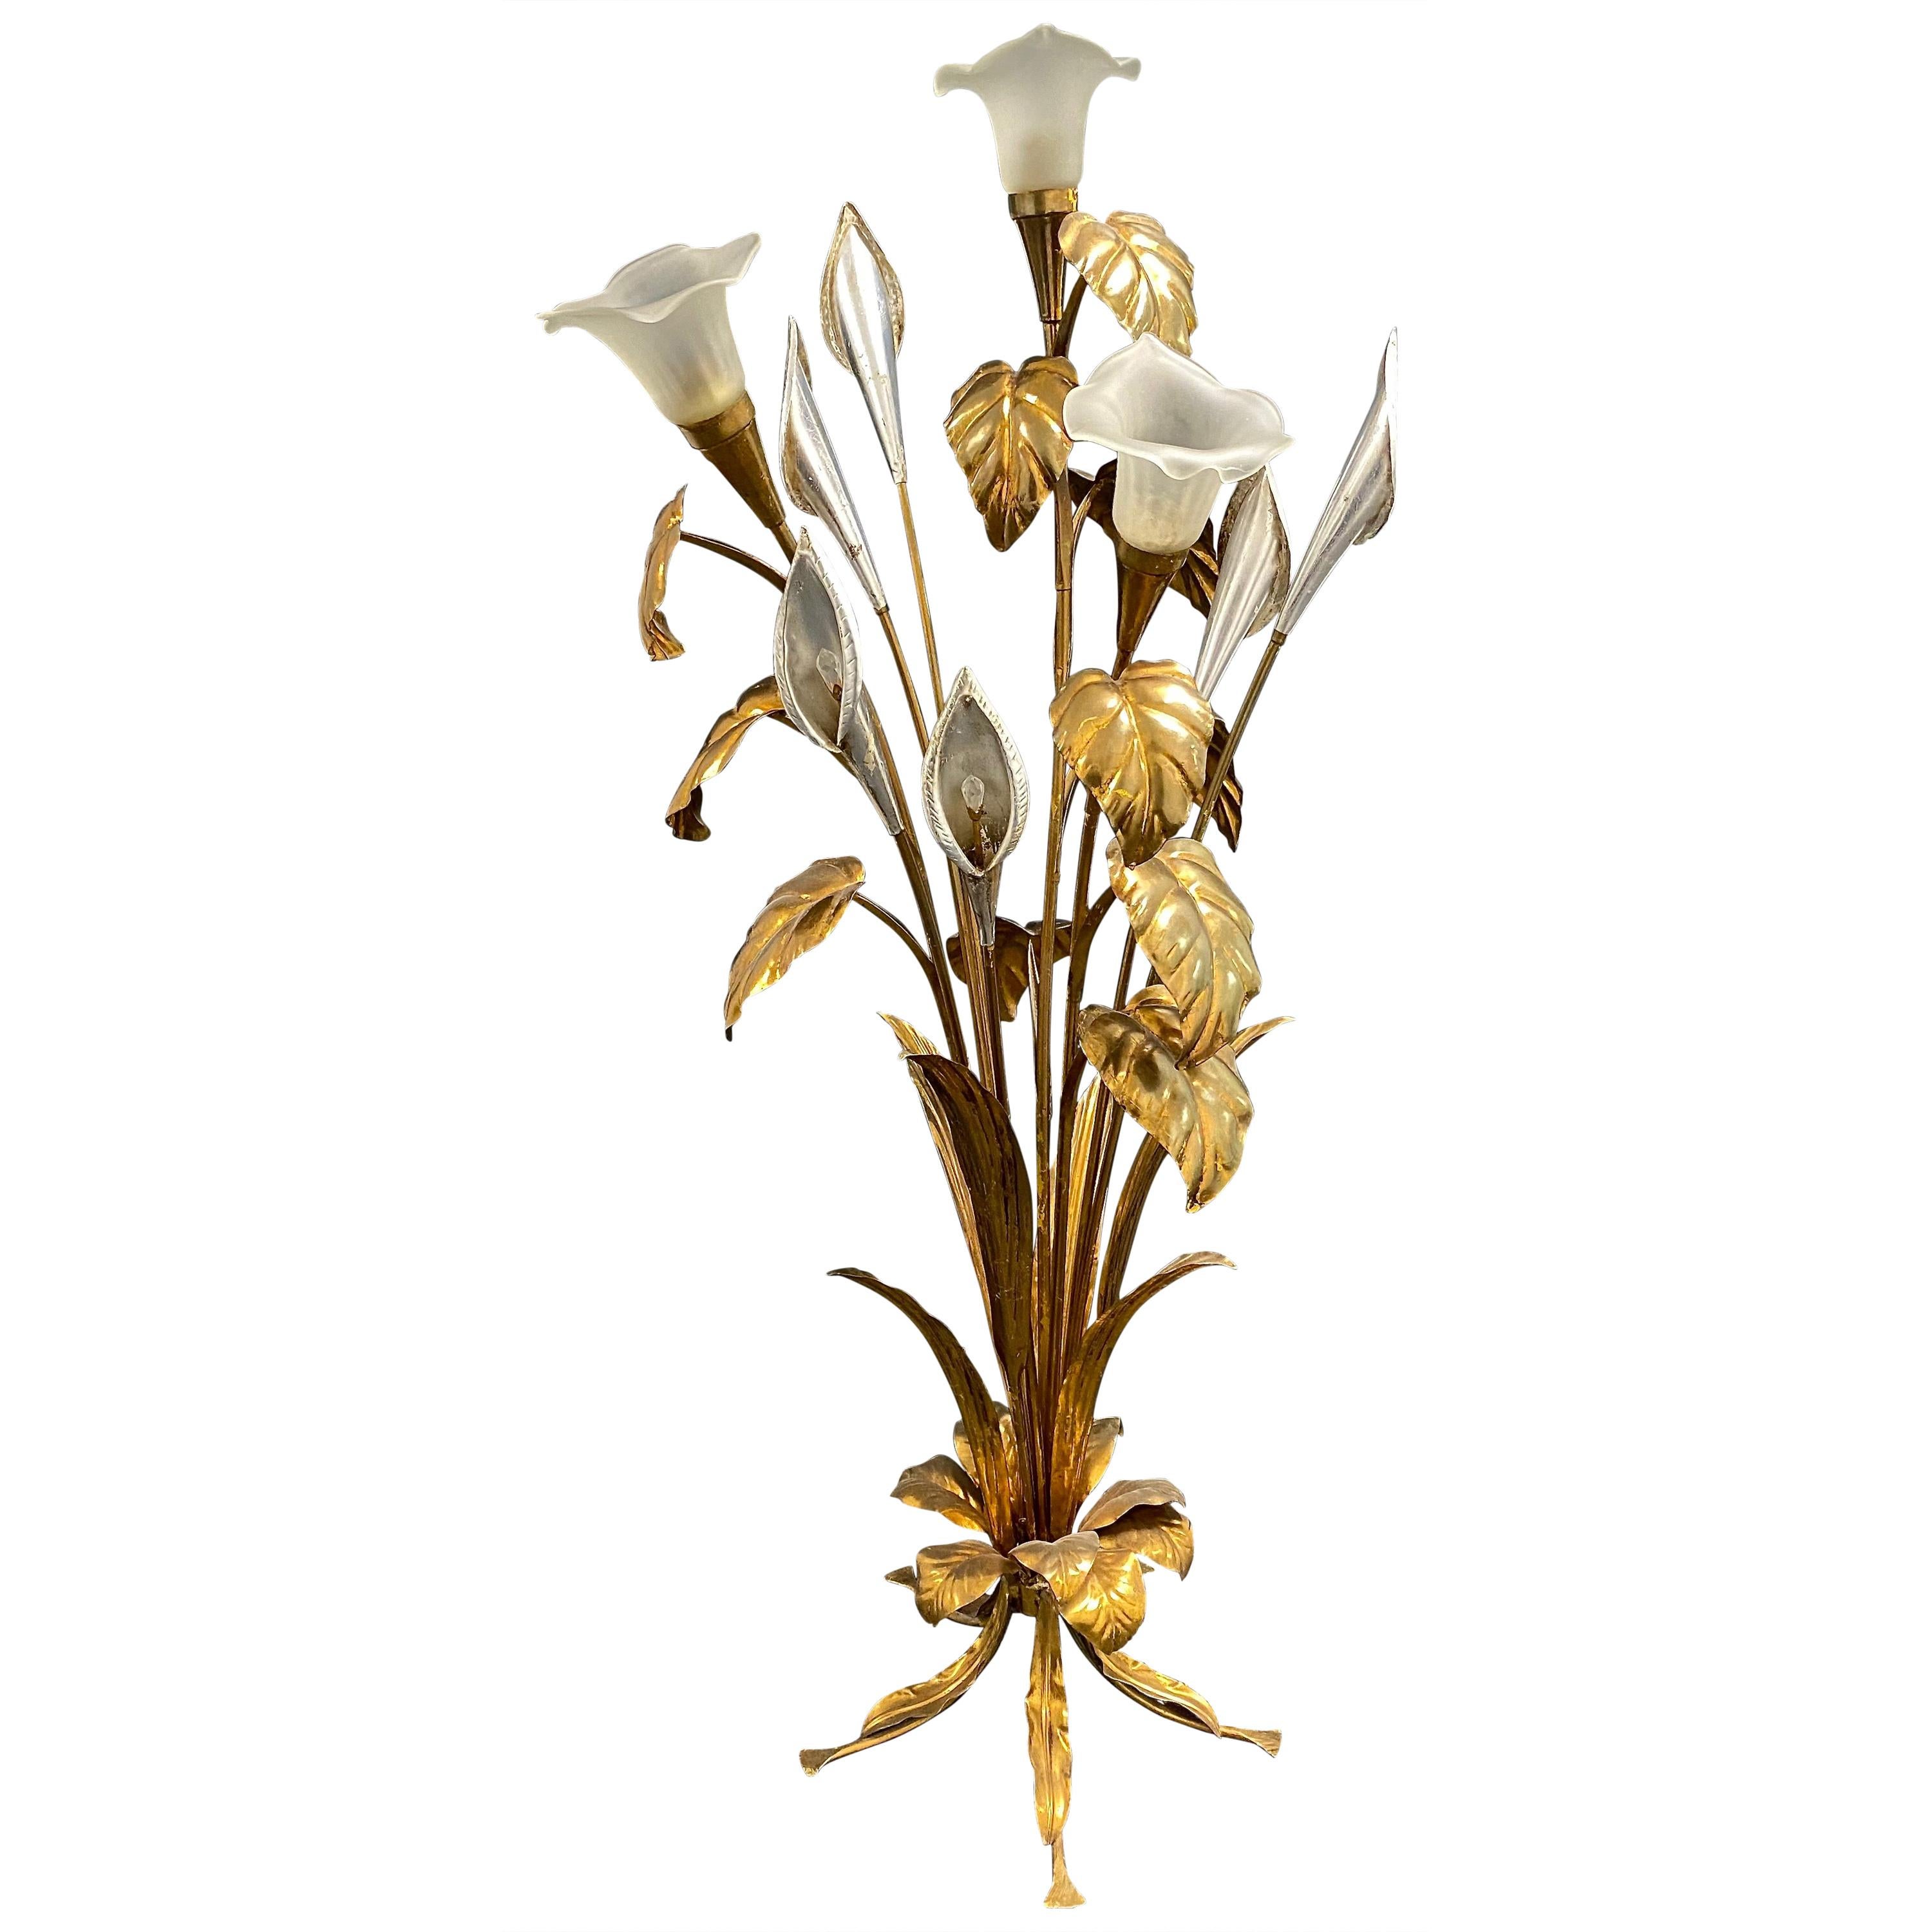 Gilded and Silver Flower Bunch Floral Floor Lamp by Hans Koegl, Germany, 1970s